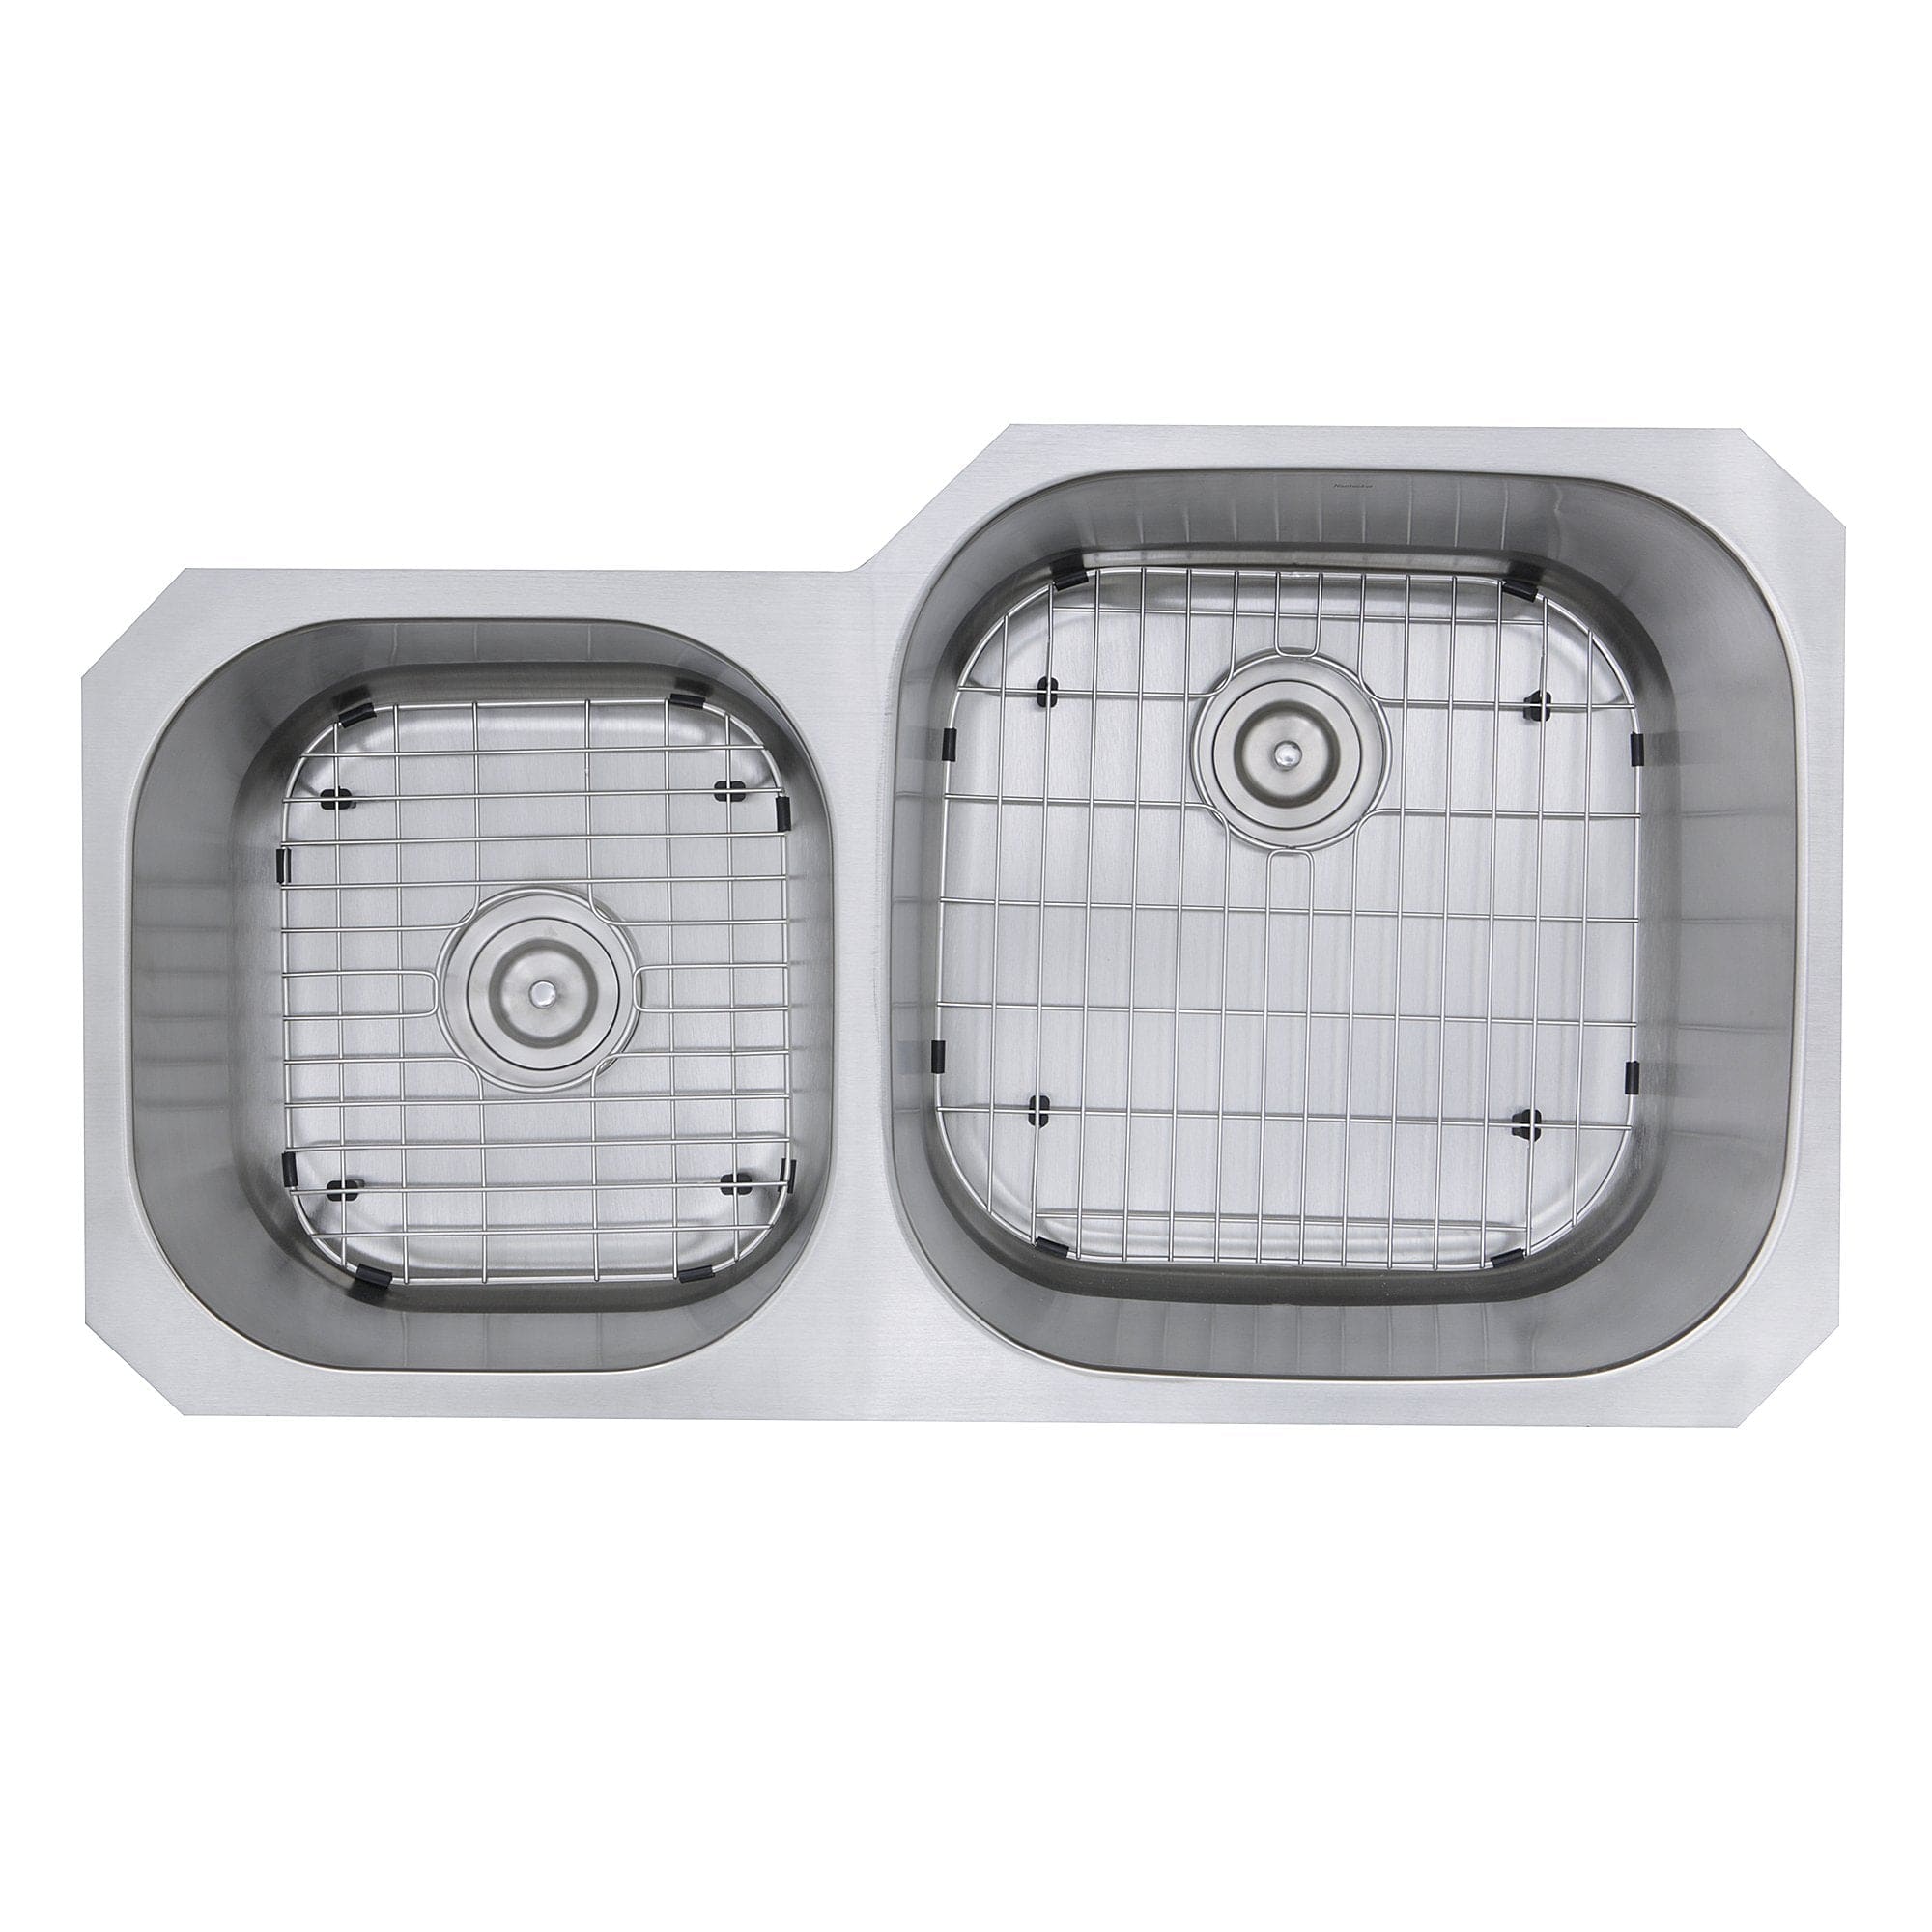 Nantucket 35" Double bowl Undermount Stainless Steel Kitchen Sink - NS3520-R-16 - Manor House Sinks